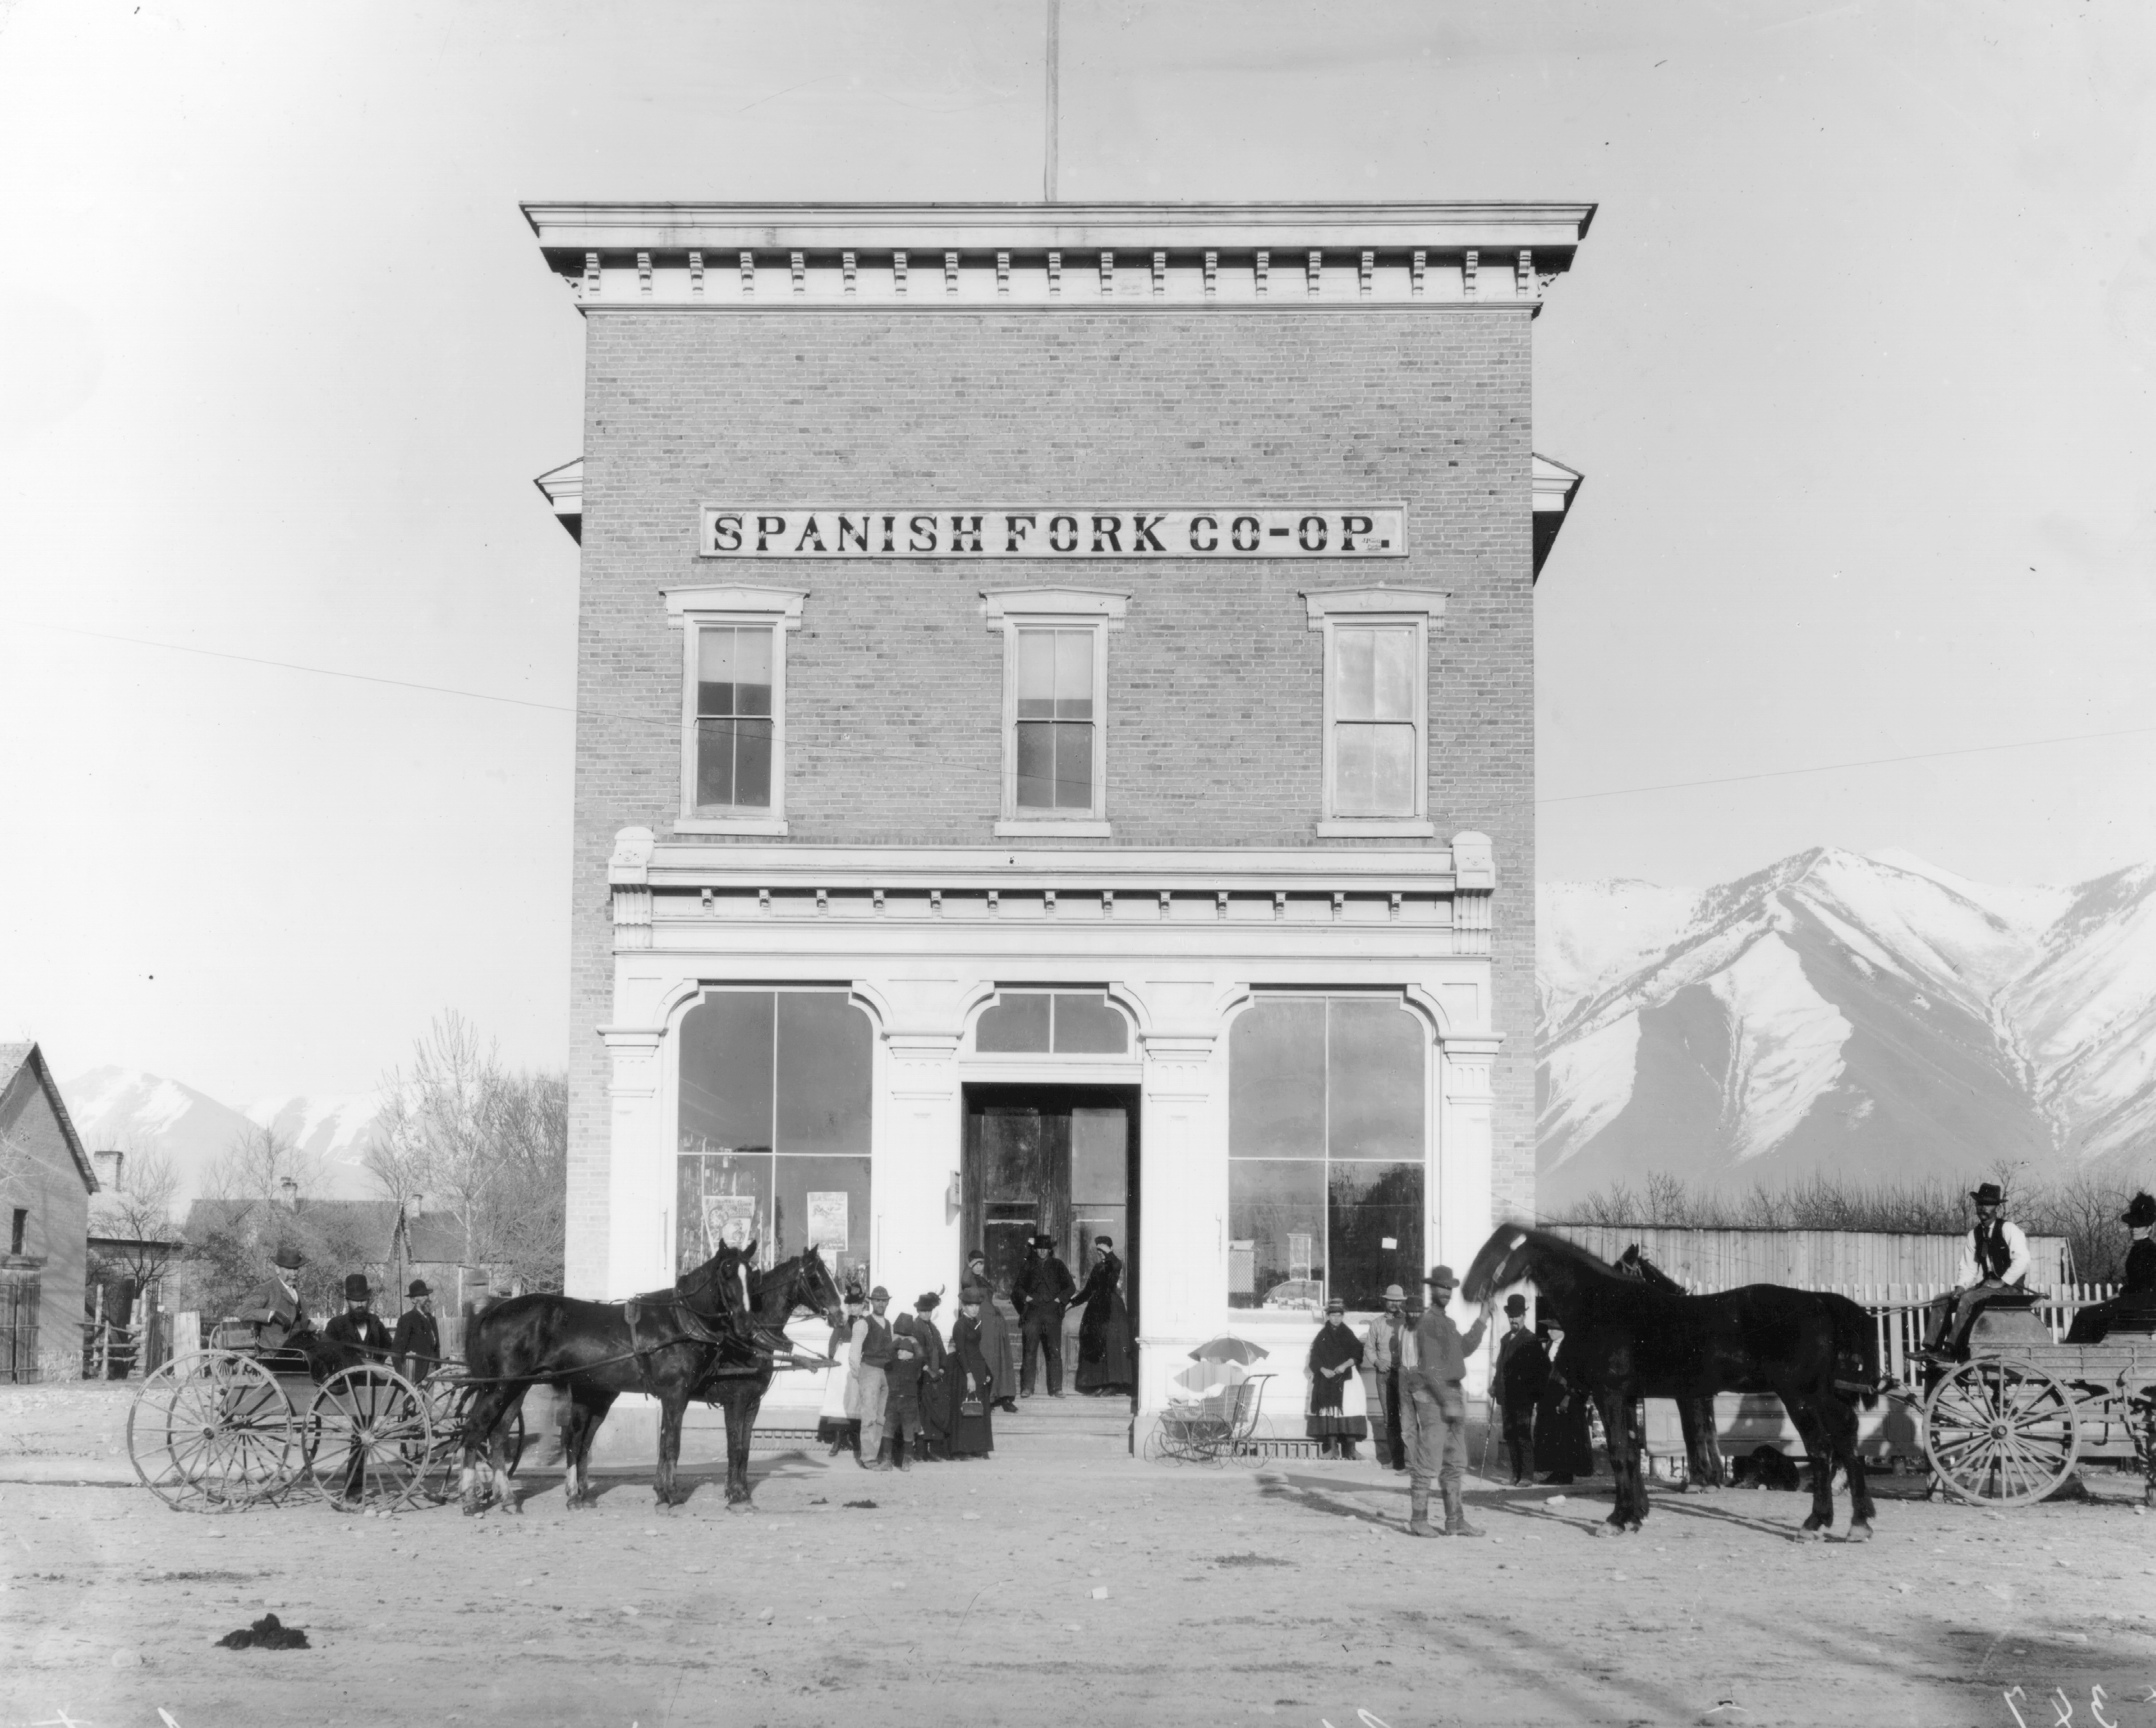 Spanish Fork Co-op. Courtesy of the Utah State Historical Society